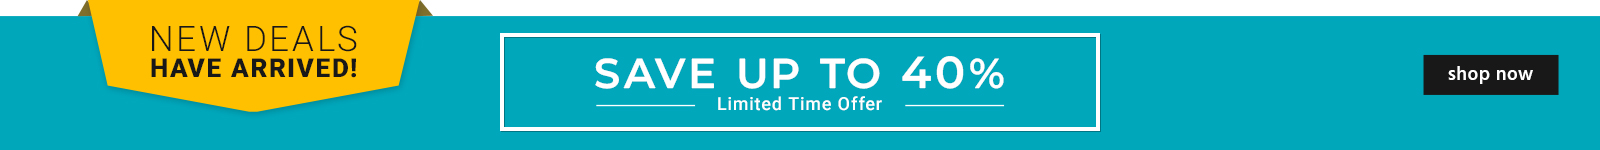 New Deals have Arrived! Save up to 40% off  Limited Time Offer Shop Now